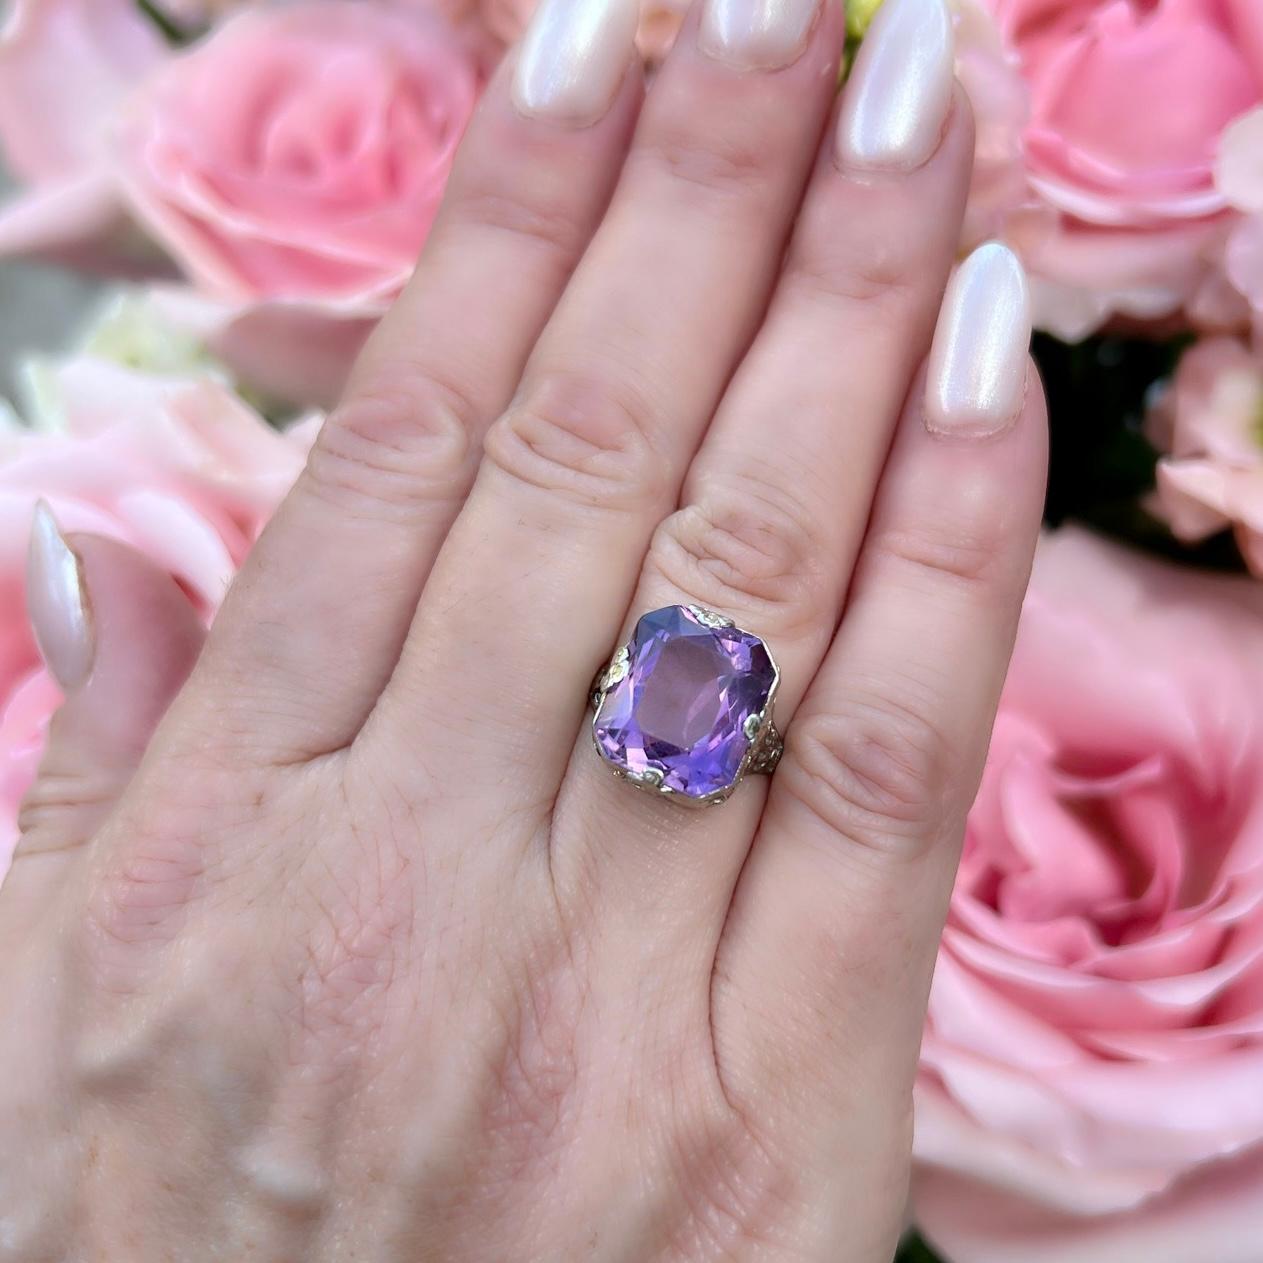 They truly don't make them like they used to! This incredible antique 18 karat white gold ring features a vibrant purple 7 carat amethyst perfectly set in one of the more gorgeous rings you're likely to see featuring hand-engraving and beautiful